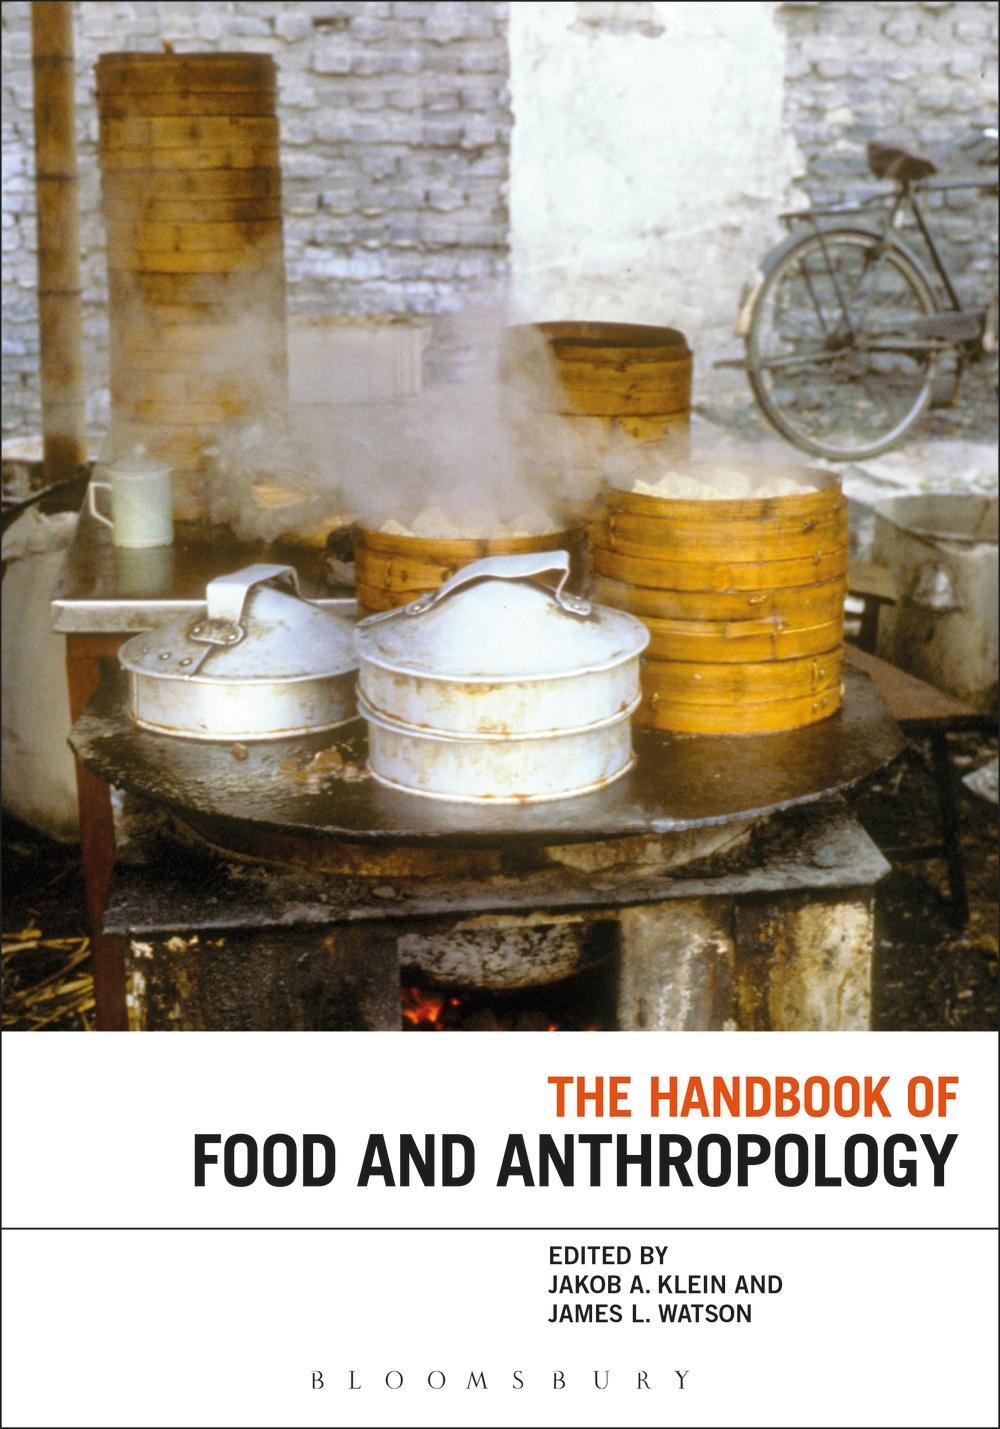 Handbook of Food and Anthropology